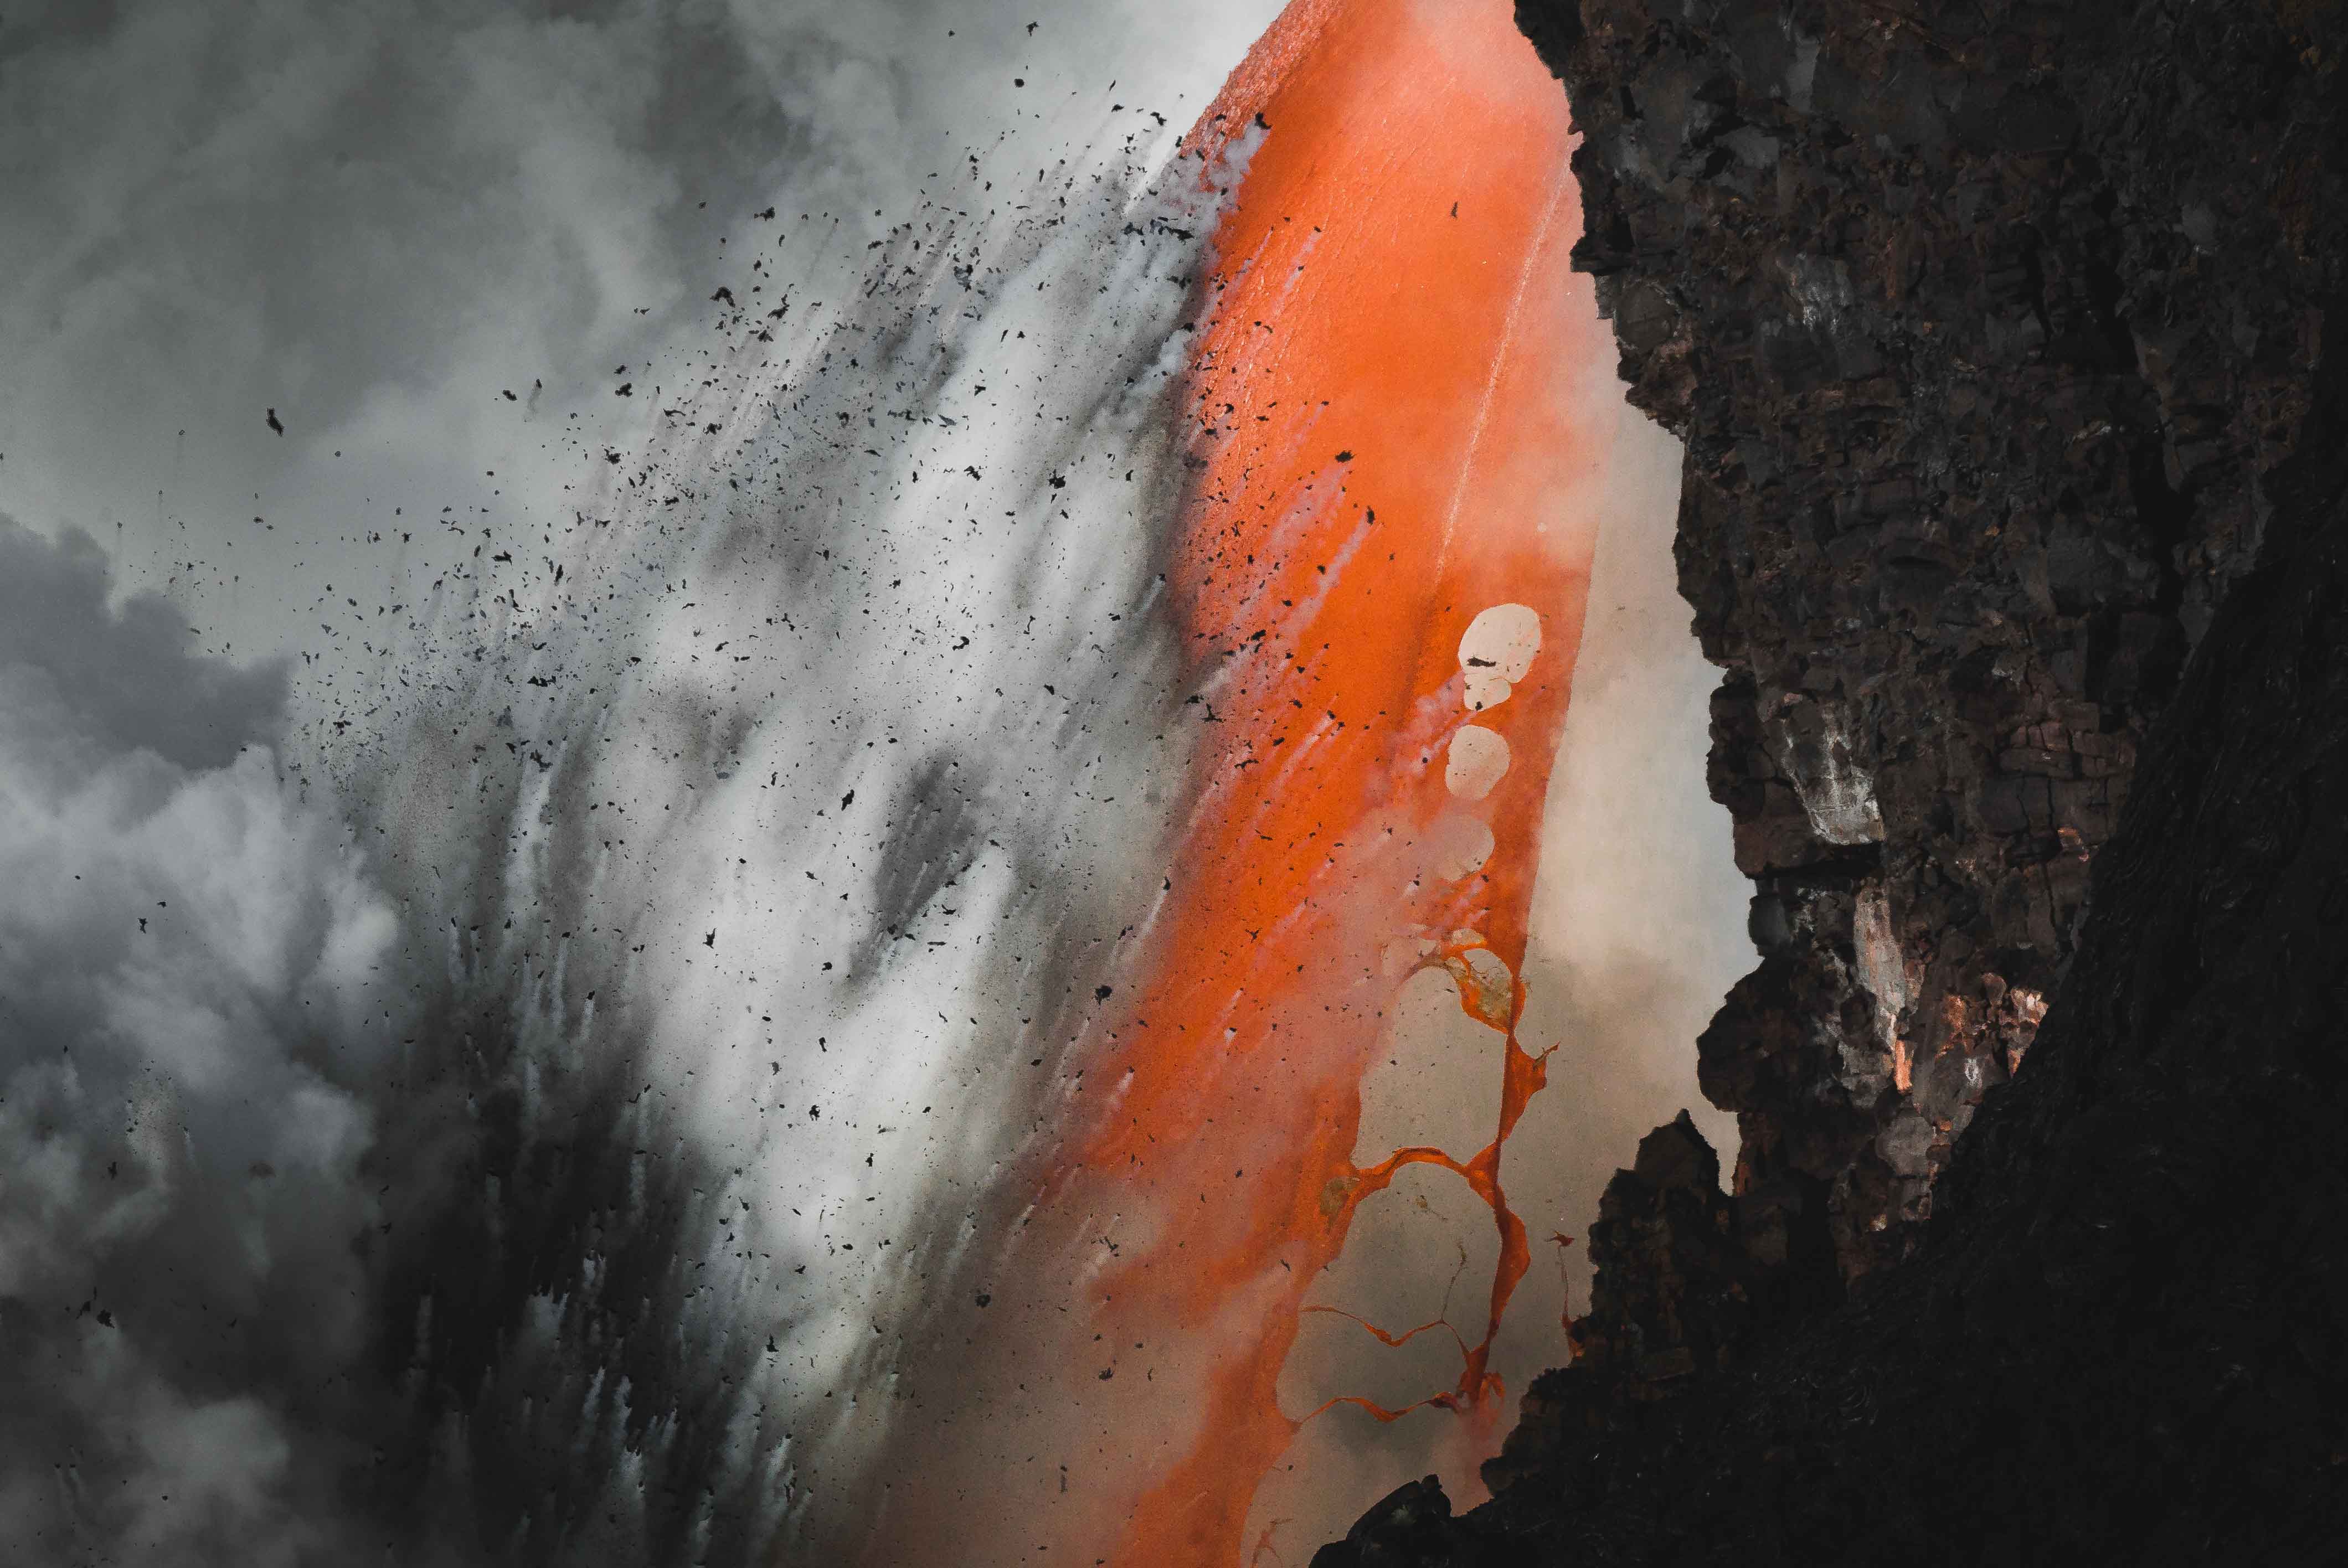 Photography of a lava spout (fire-hose) at Hawaii Volcanoes National Park